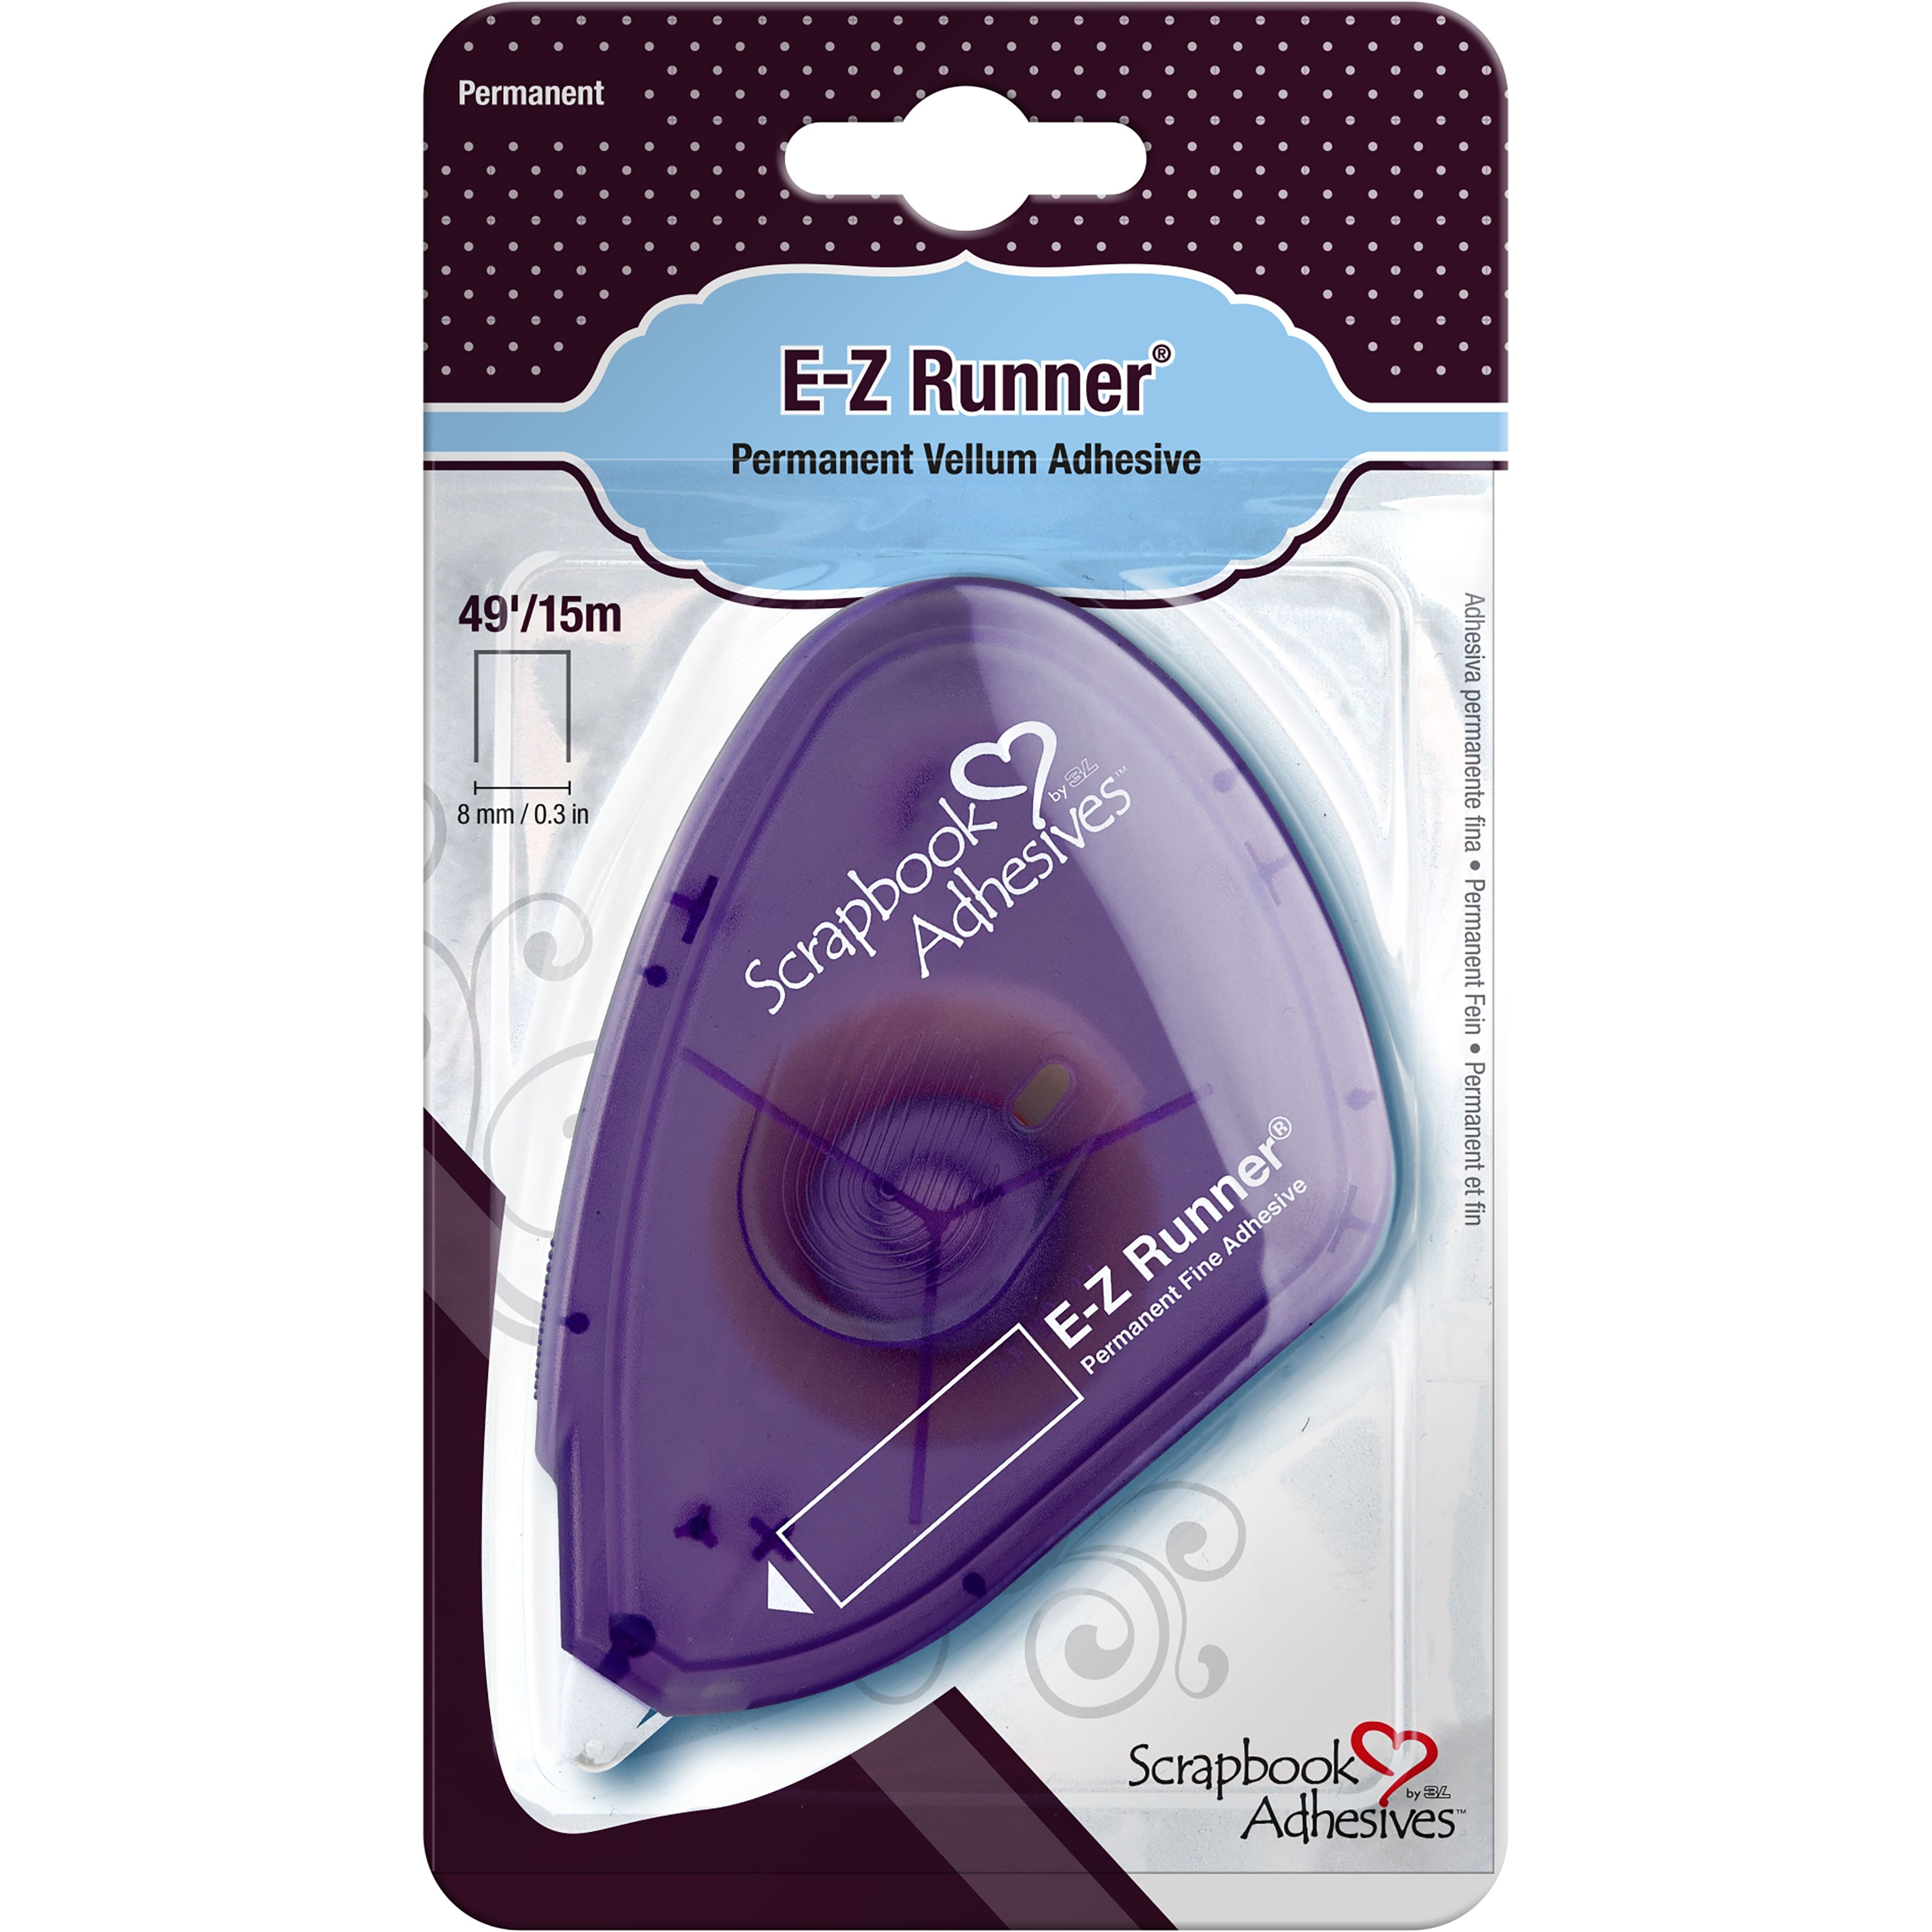 Scrapbook Adhesives by 3L® E-Z Runner® Permanent Fine Adhesive